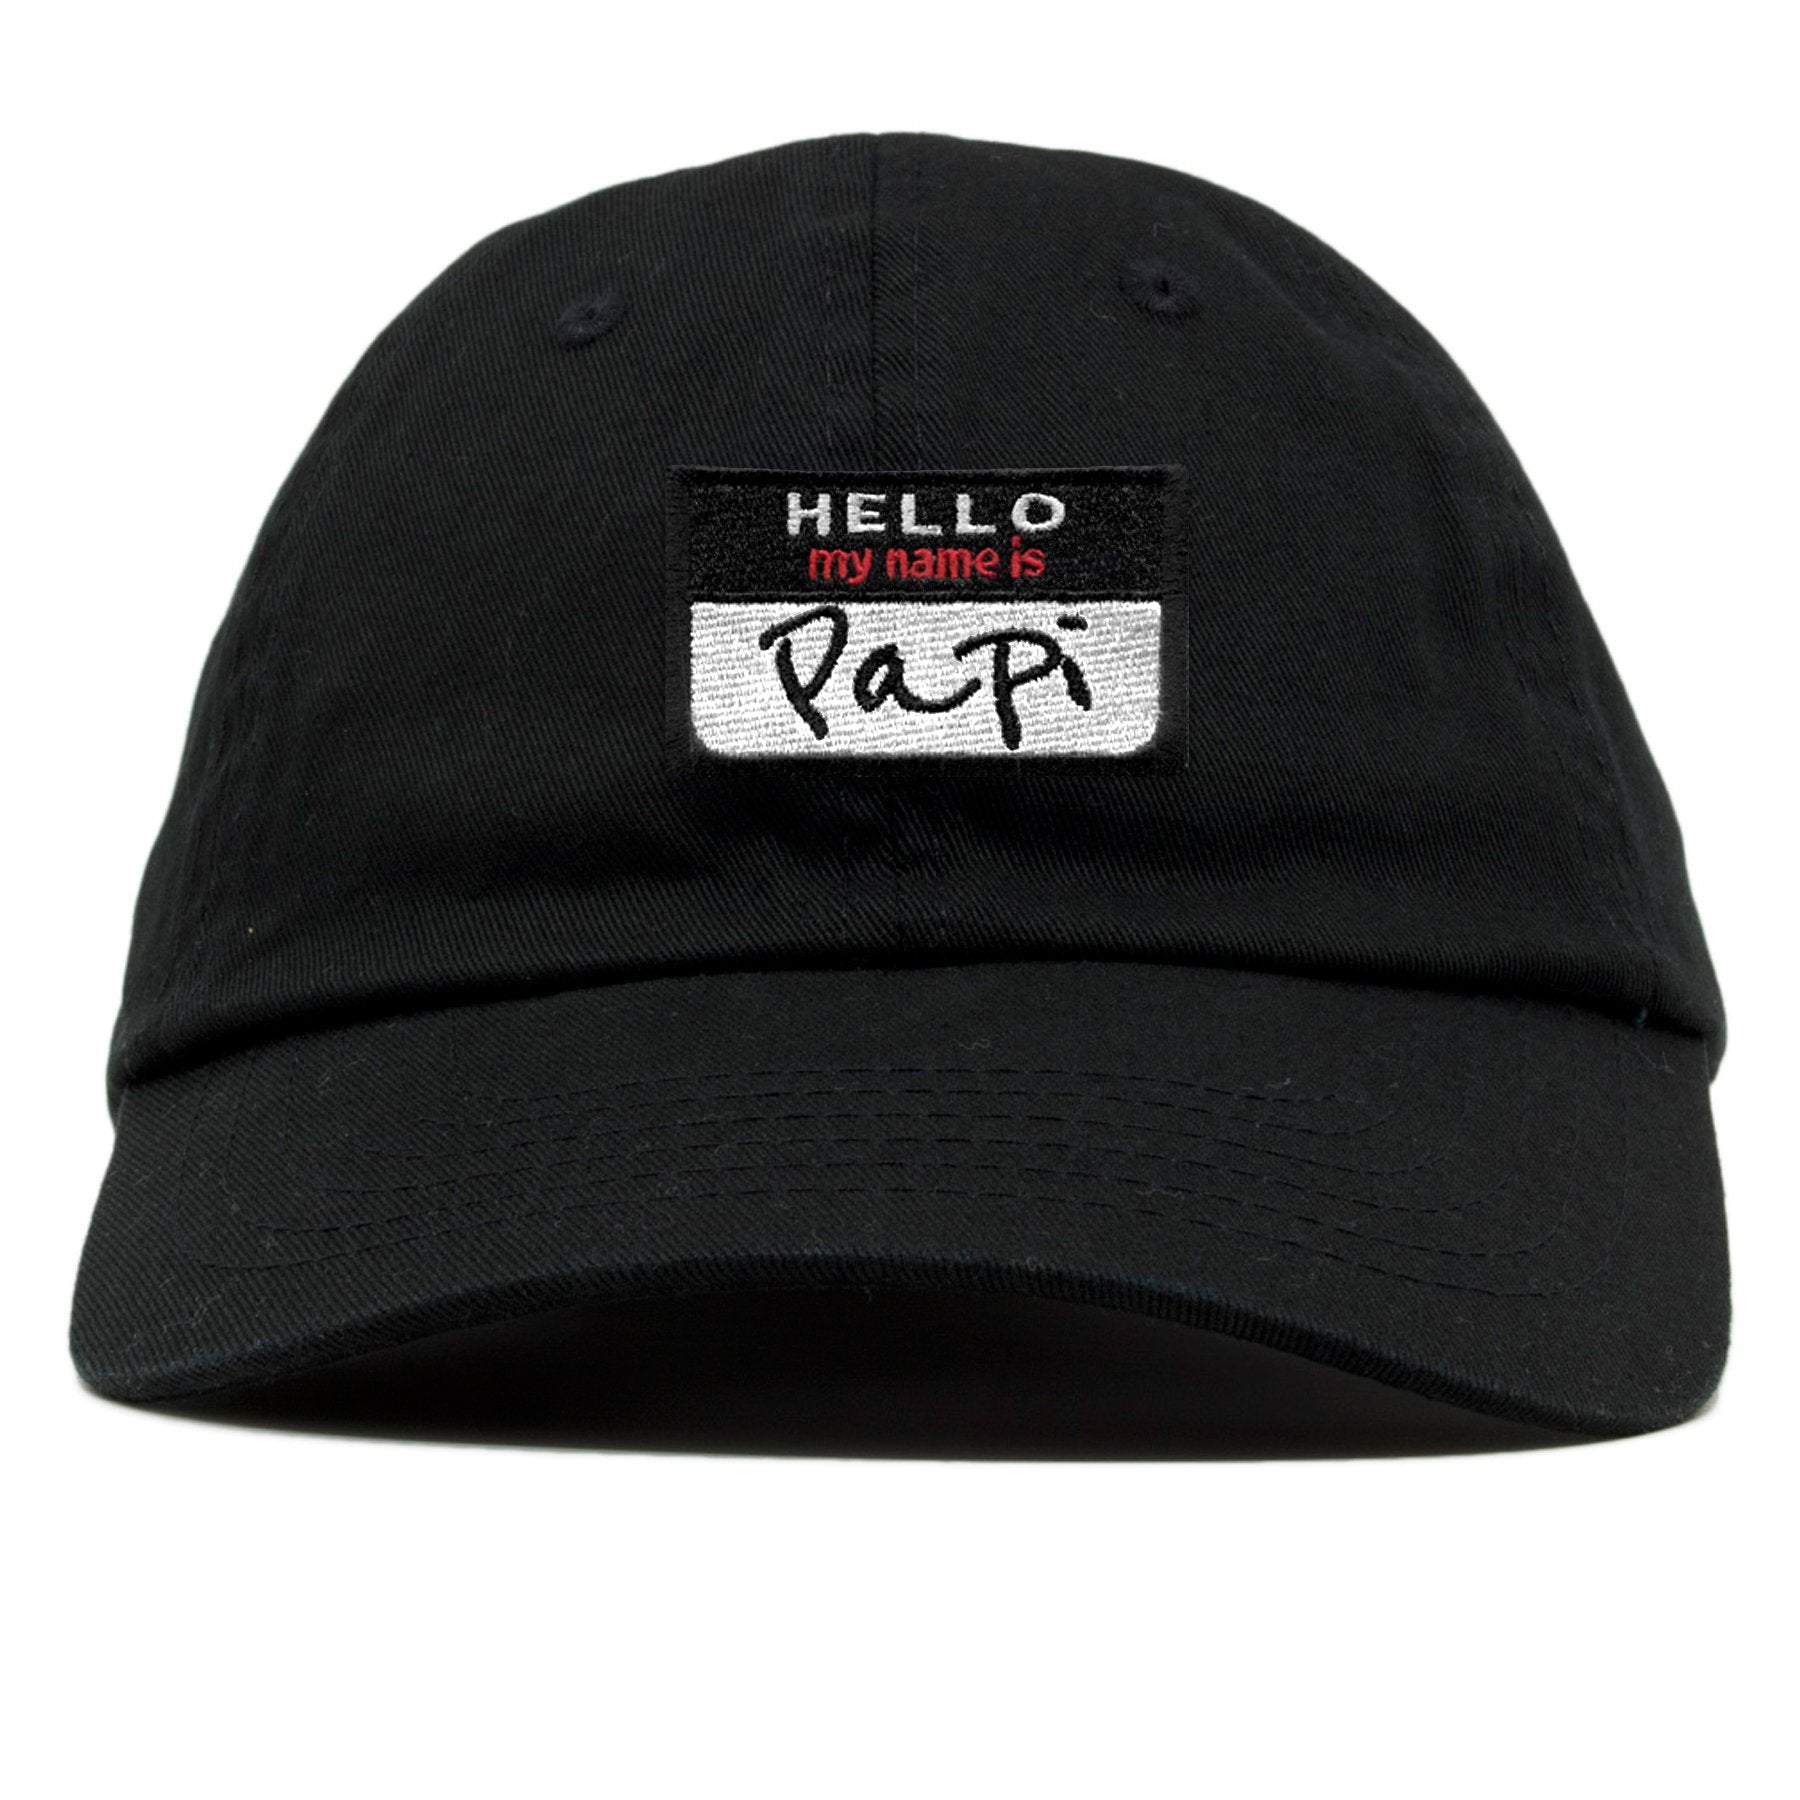 on the front of the hello my name is papi black name tag dad hat, it says hello my name is papi on a name tag style logo